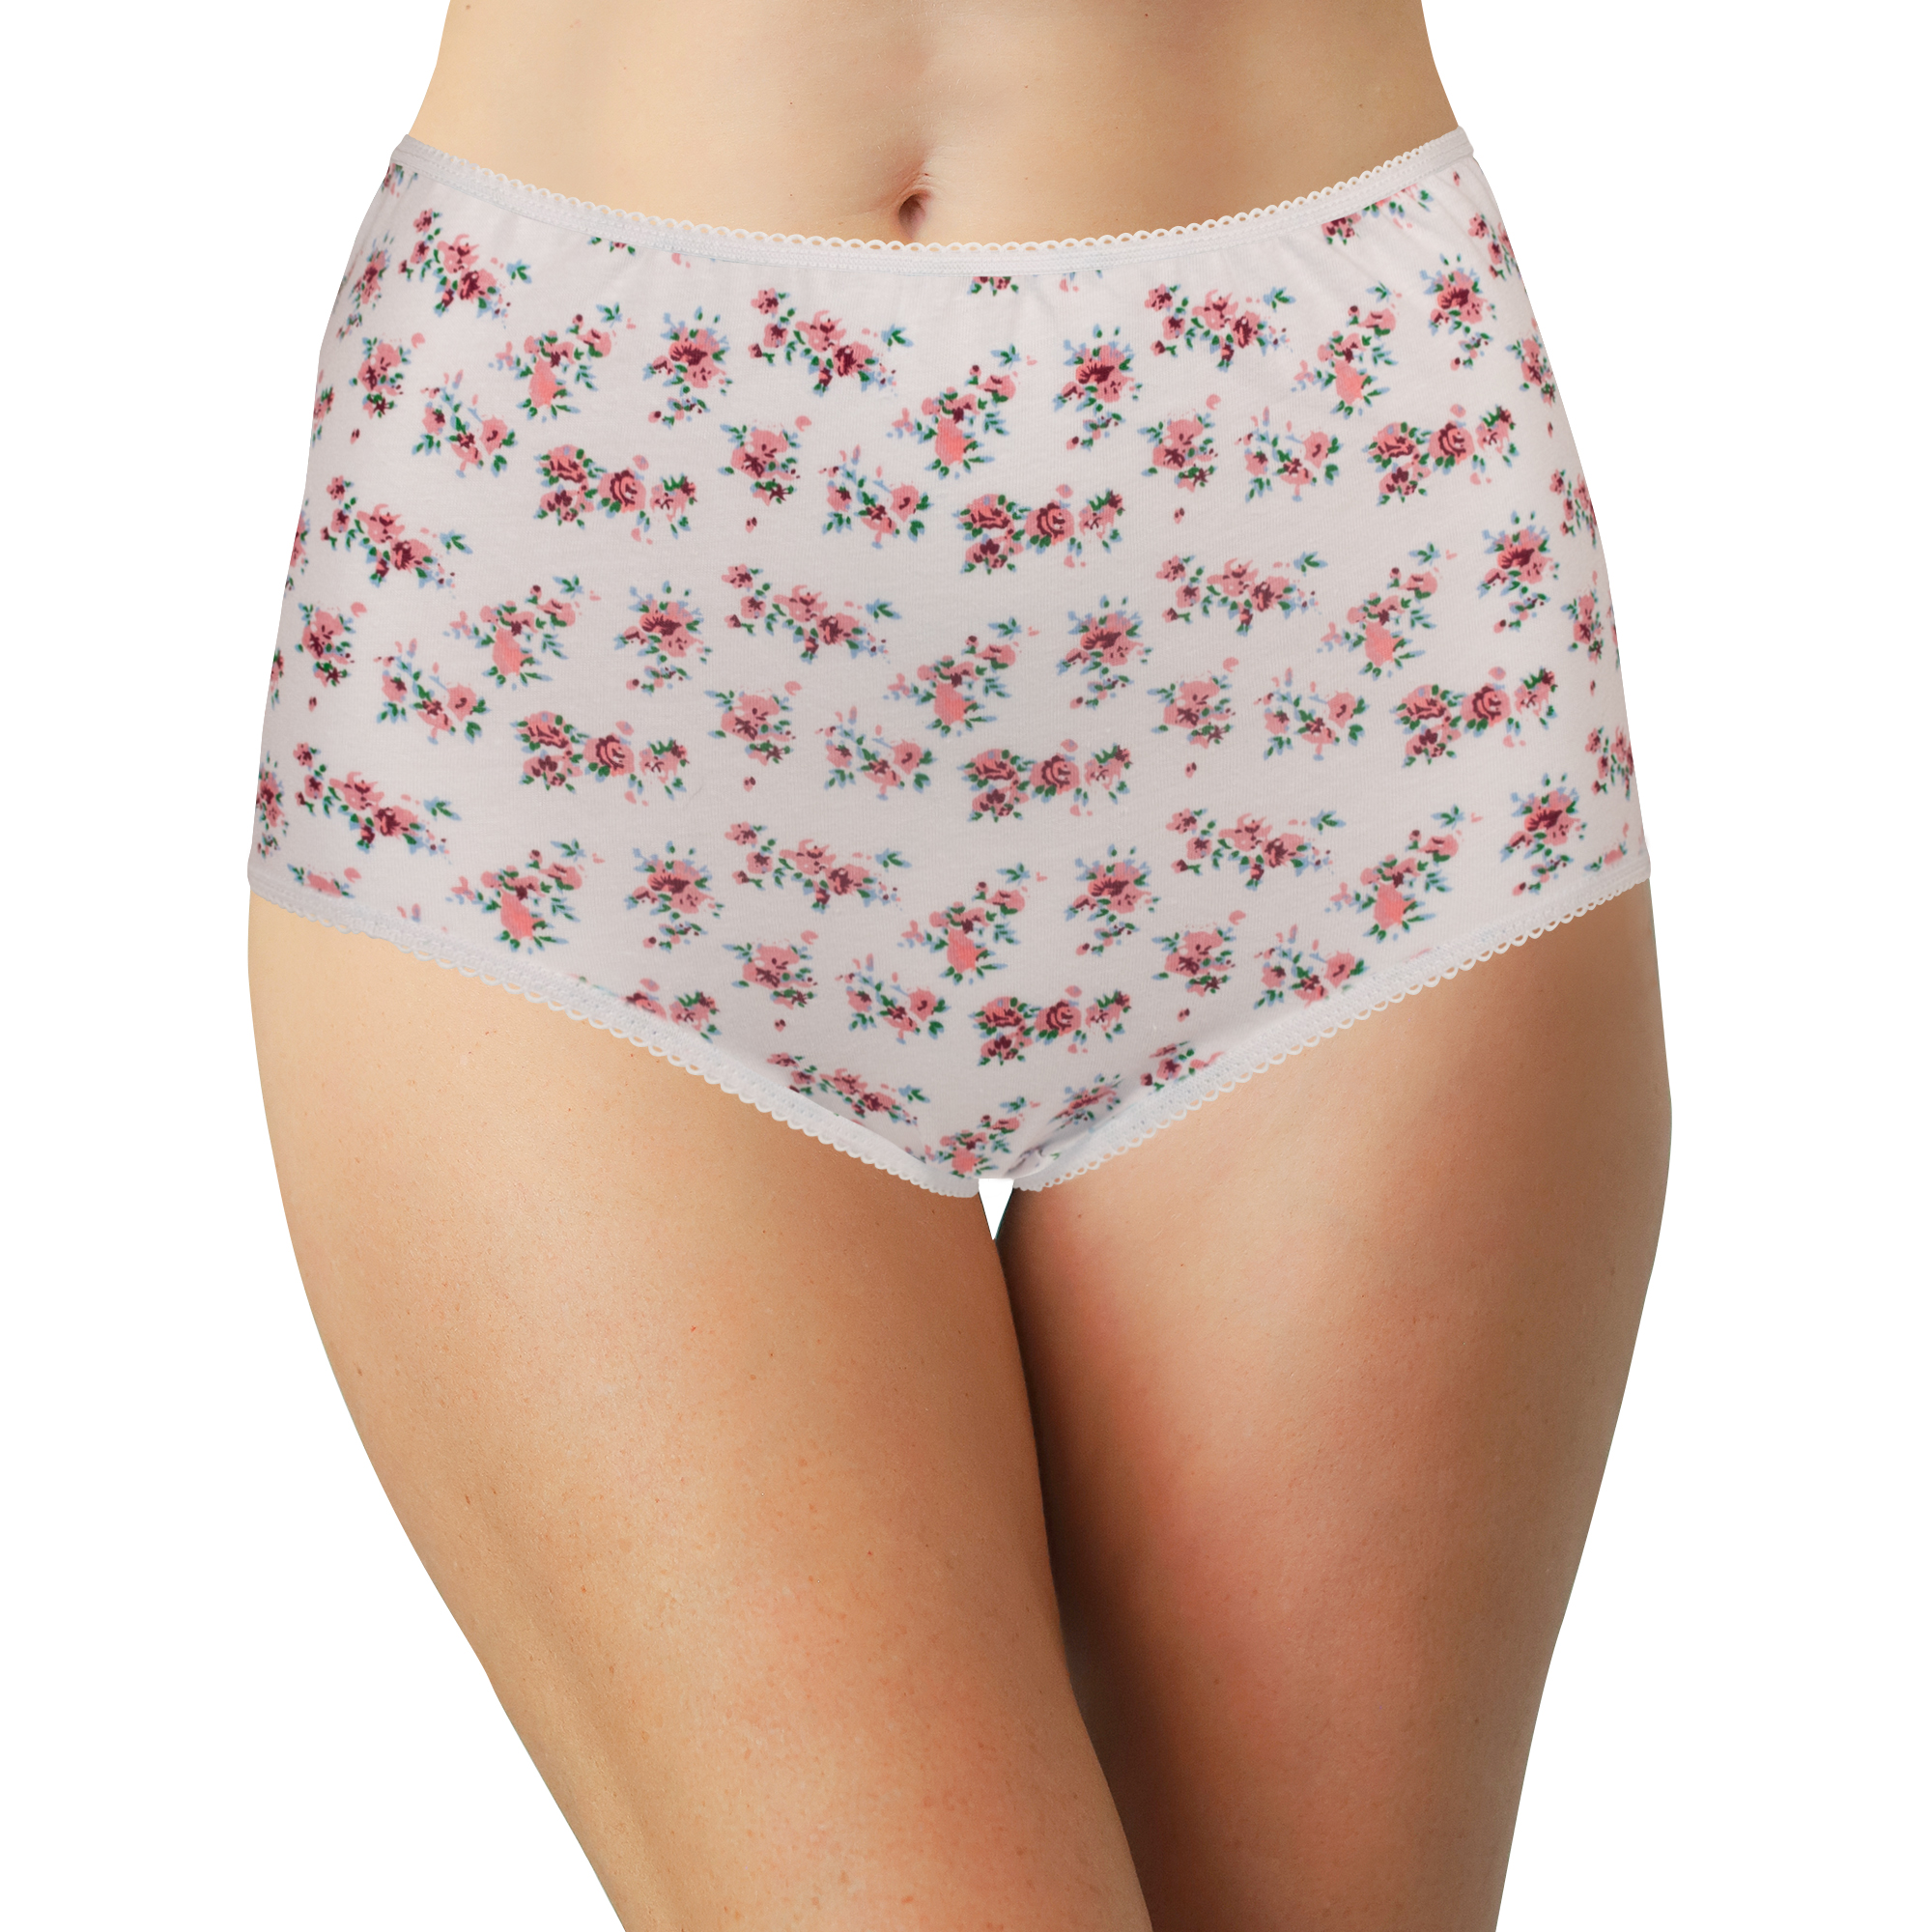 Teri Full Coverage Cotton Panty Floral Print 6 Pack- Style 15001A